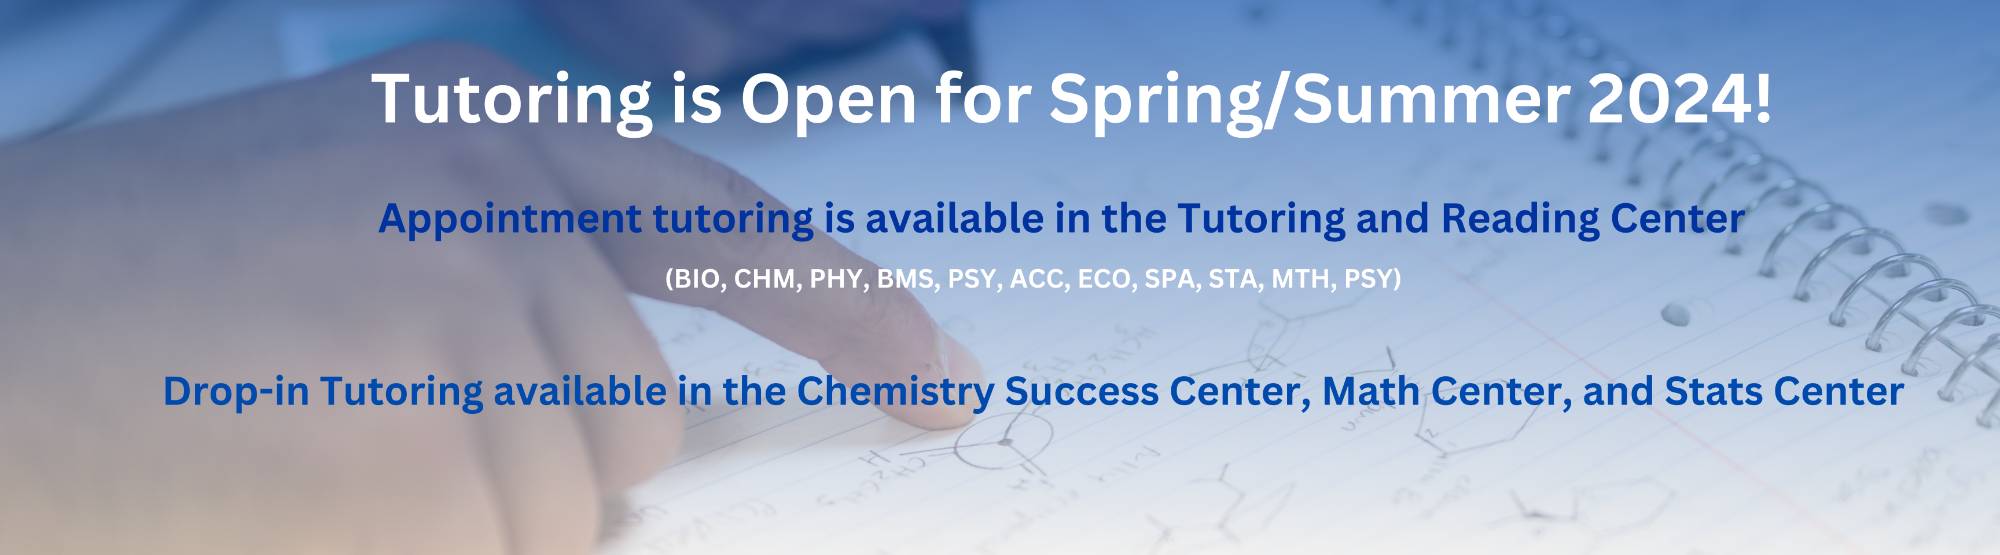 Summer tutoring hours Tuesday Wednesday Thursday from 10am to 4pm. Available in the Tutoring and reading center, the chemistry success center, and the math and stats center.